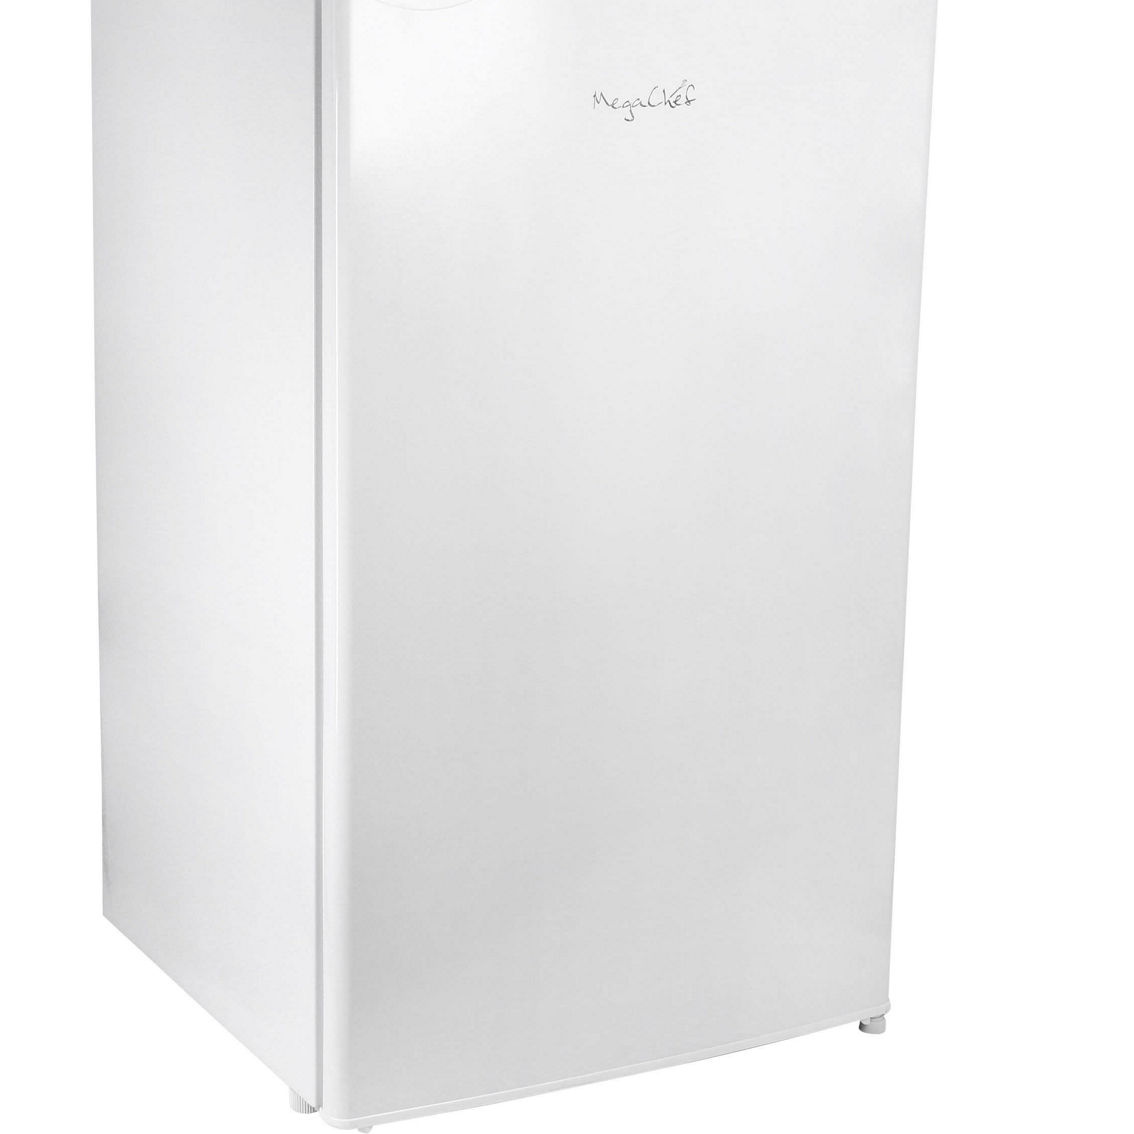 MegaChef 3.2 Cubic Feet Refrigerator in White - Image 2 of 5